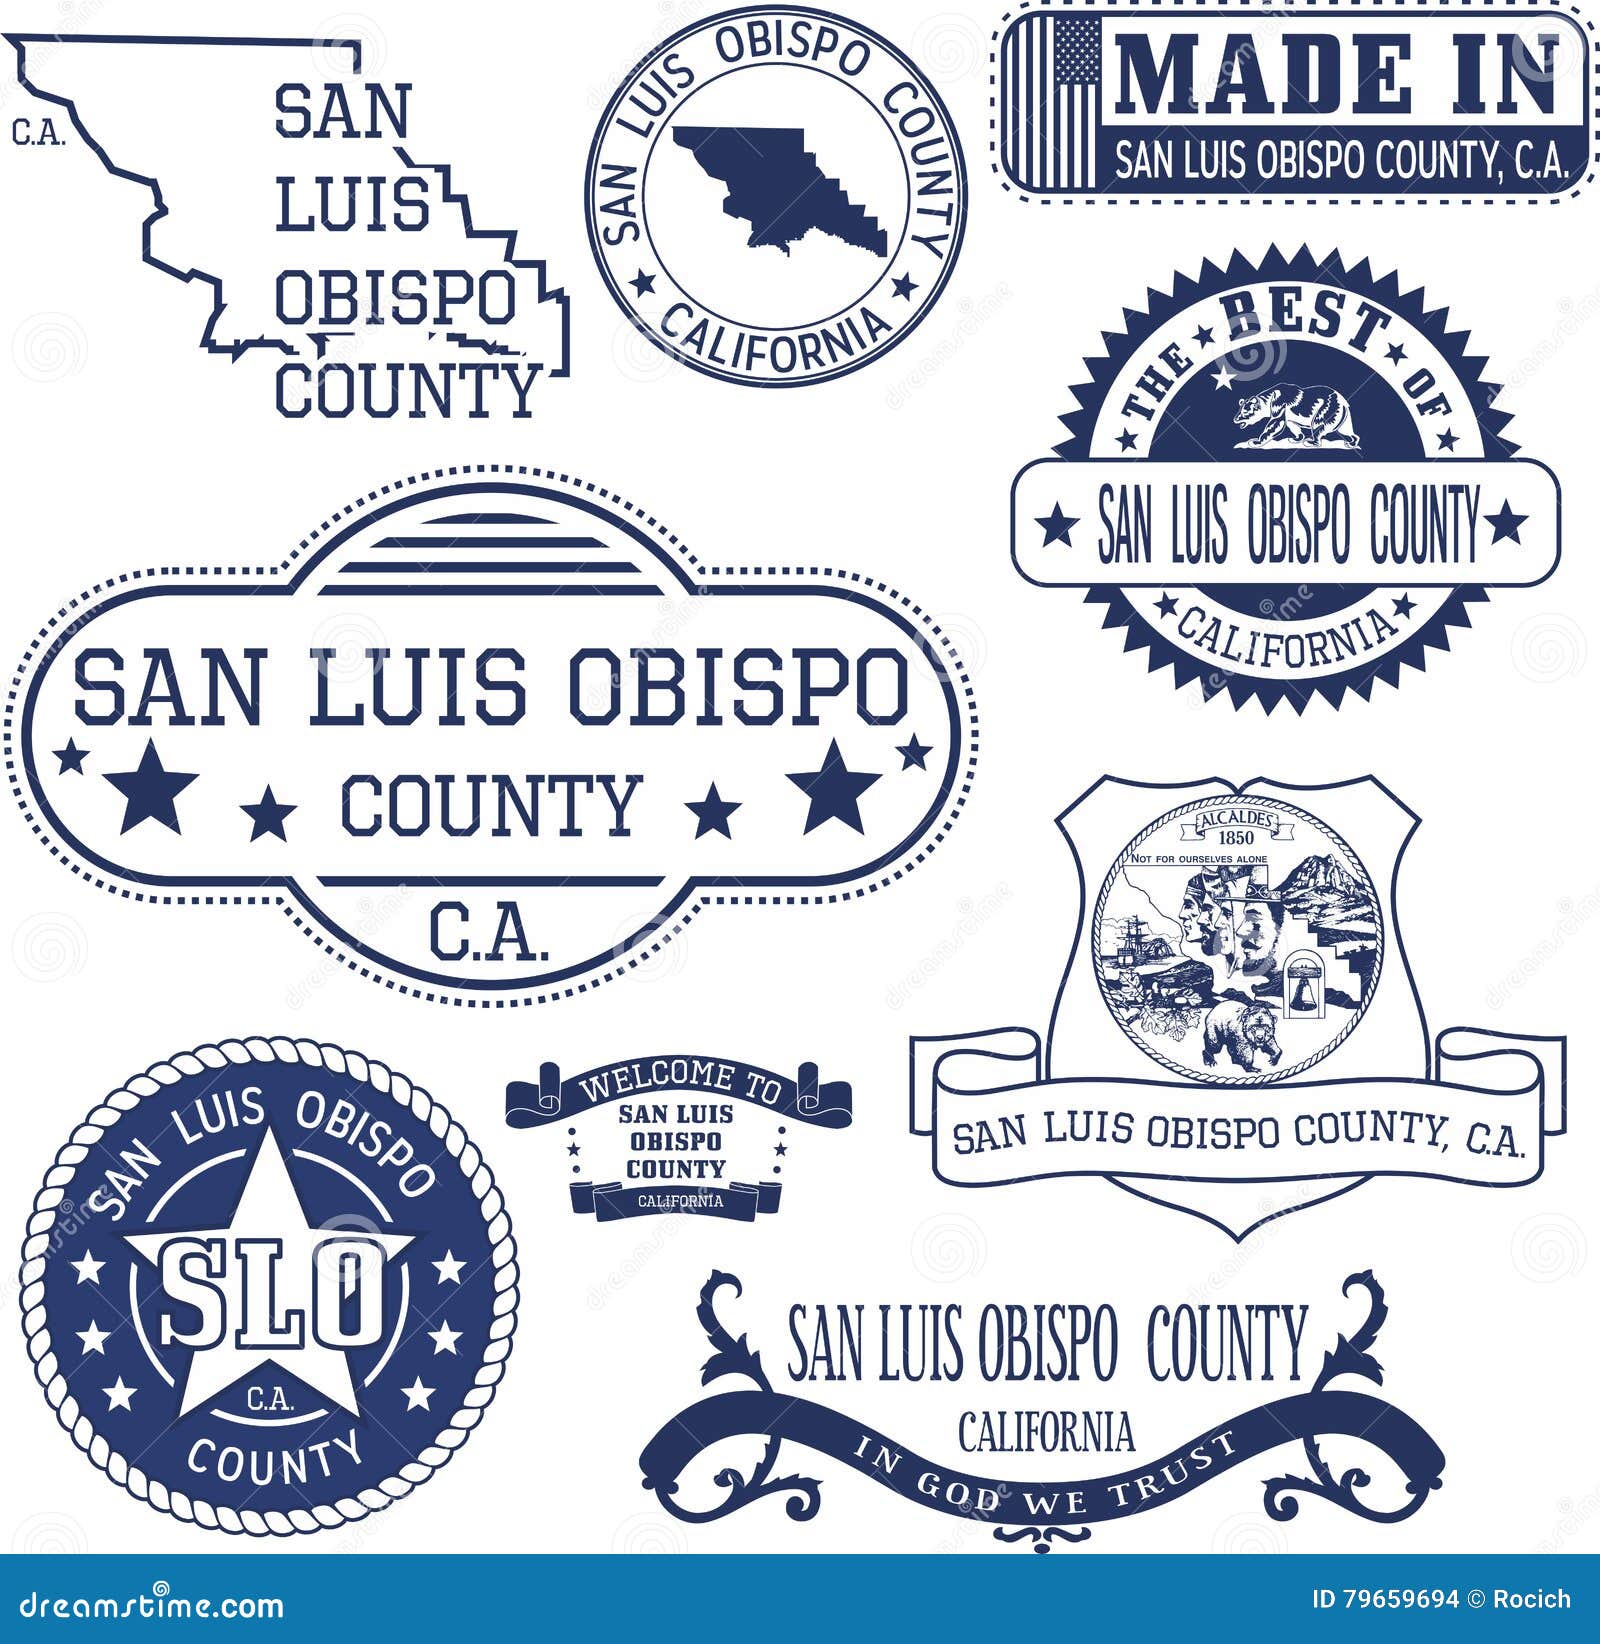 san luis obispo county, ca. set of stamps and signs